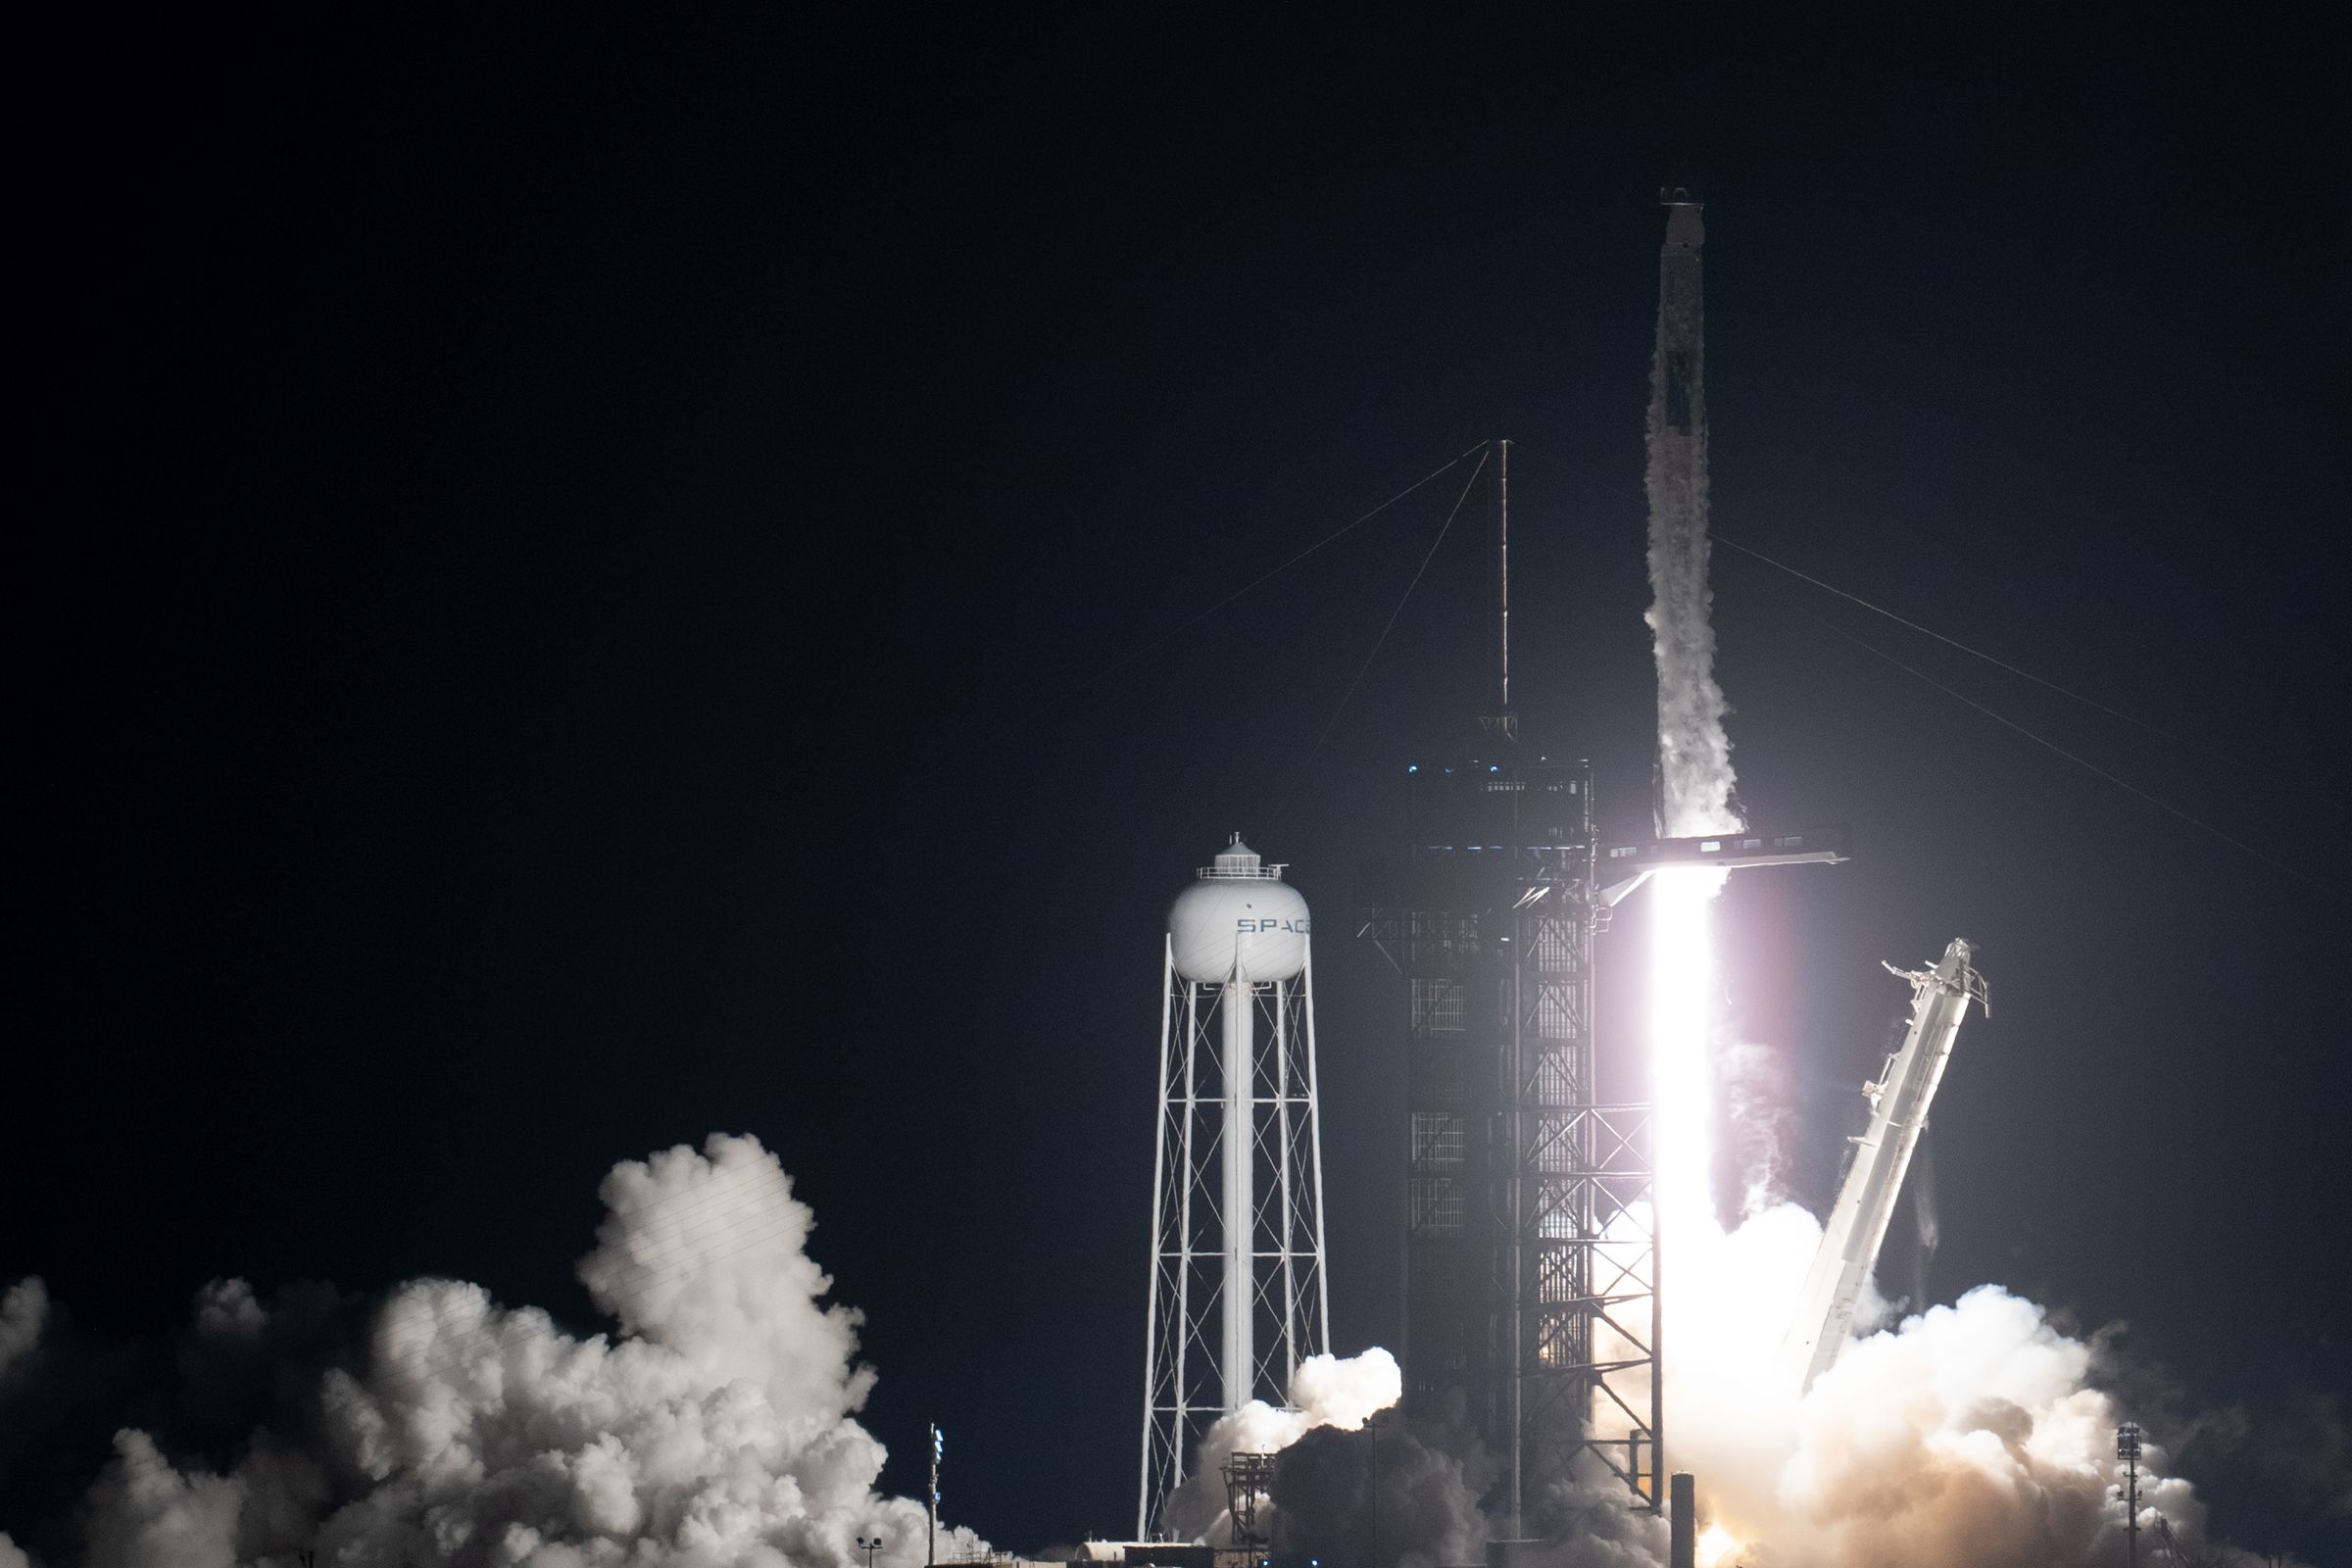 SpaceX’s Falcon 9 rocket carries the Crew-3 astronauts to space